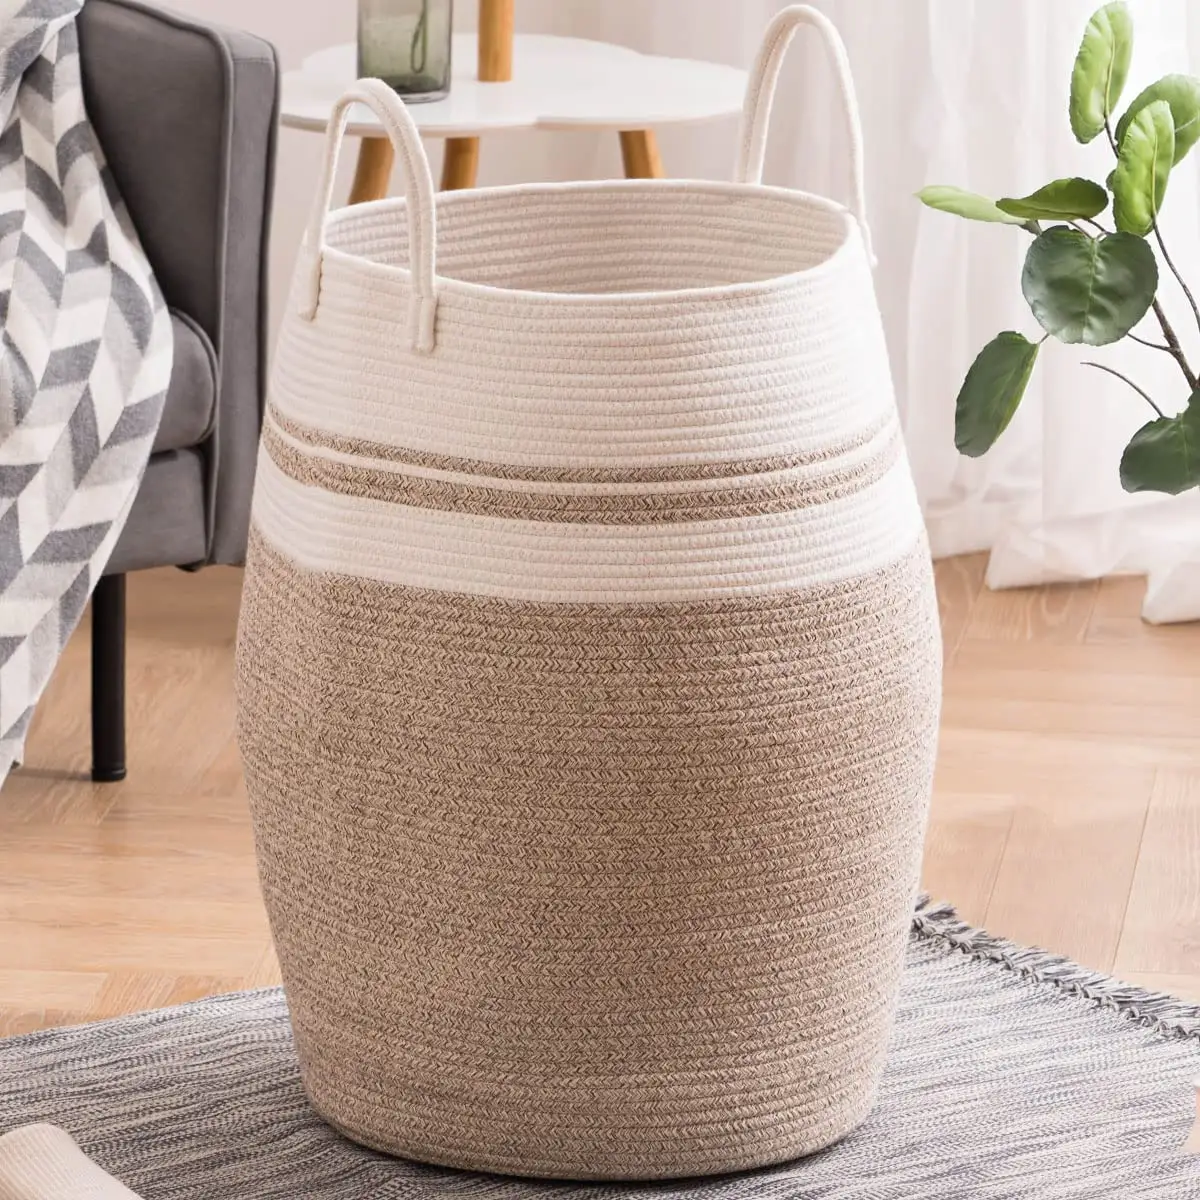 Laundry Basket Woven Cotton Rope Storage Basket Dirty Clothes Hamper Tall Blanket Basket Laundry Bin Large Toy Storage